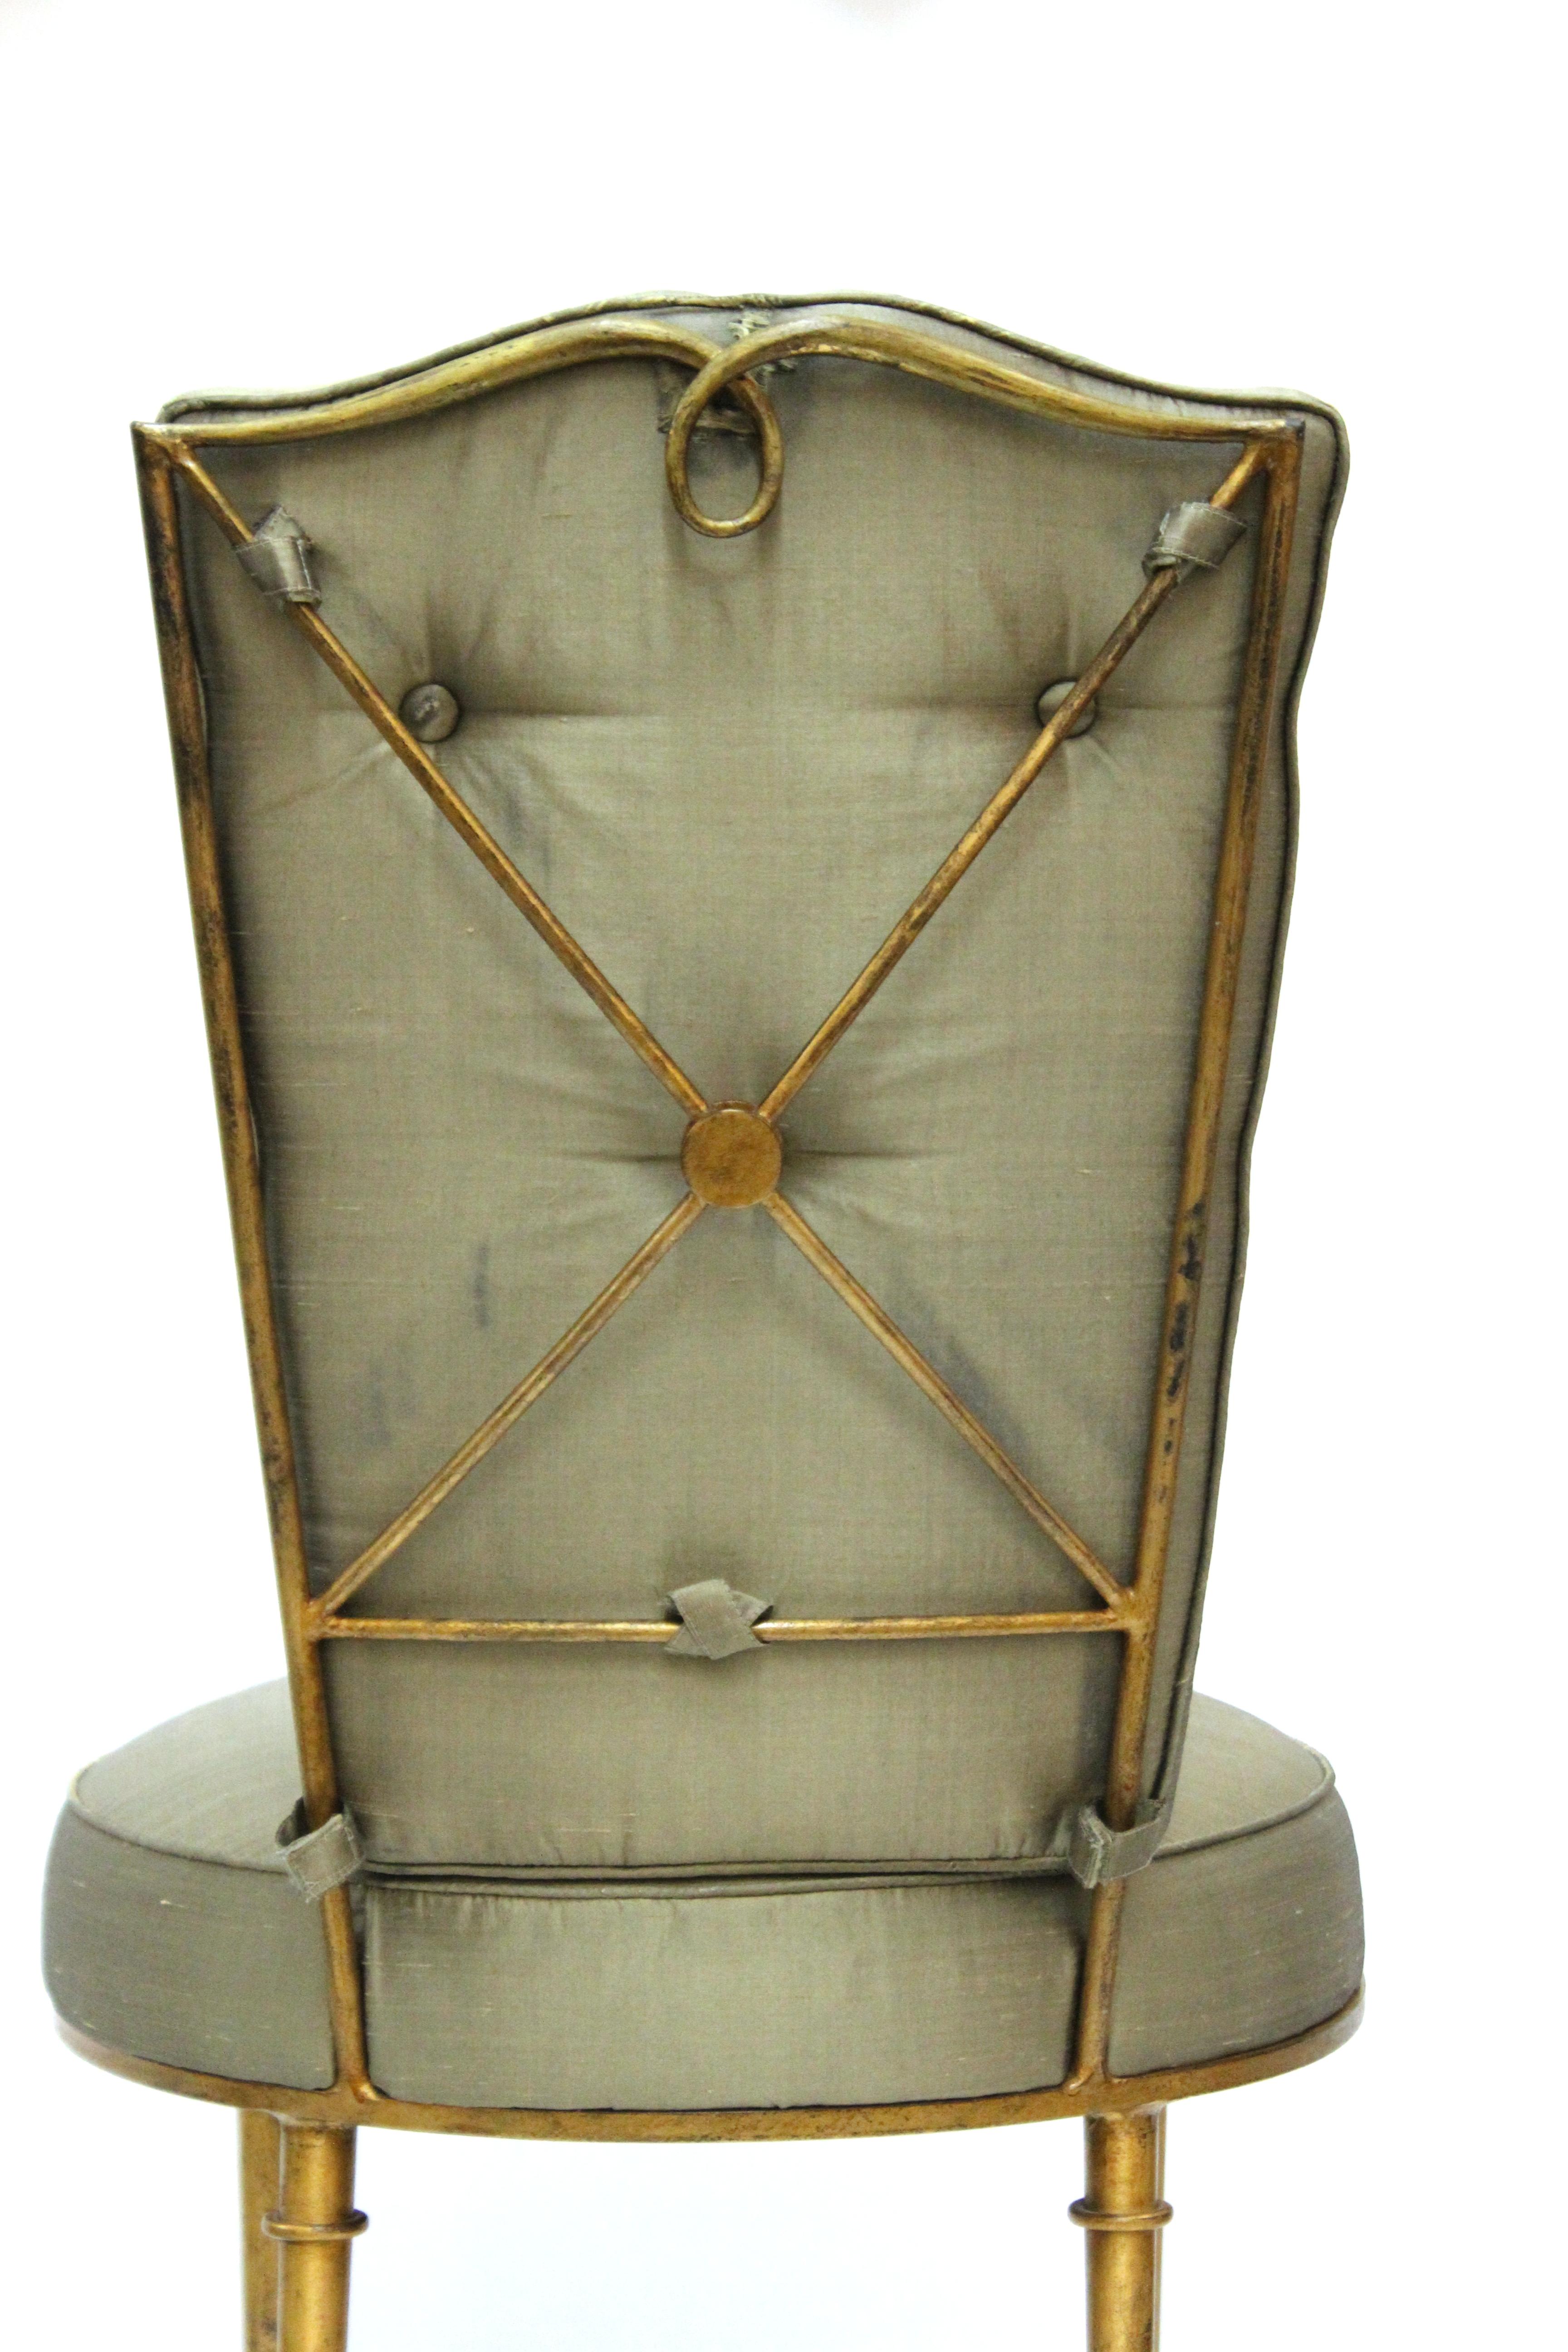 20th Century Rene Prou French Mid-Century Modern Side Chair or Vanity Chair in Gilt Metal